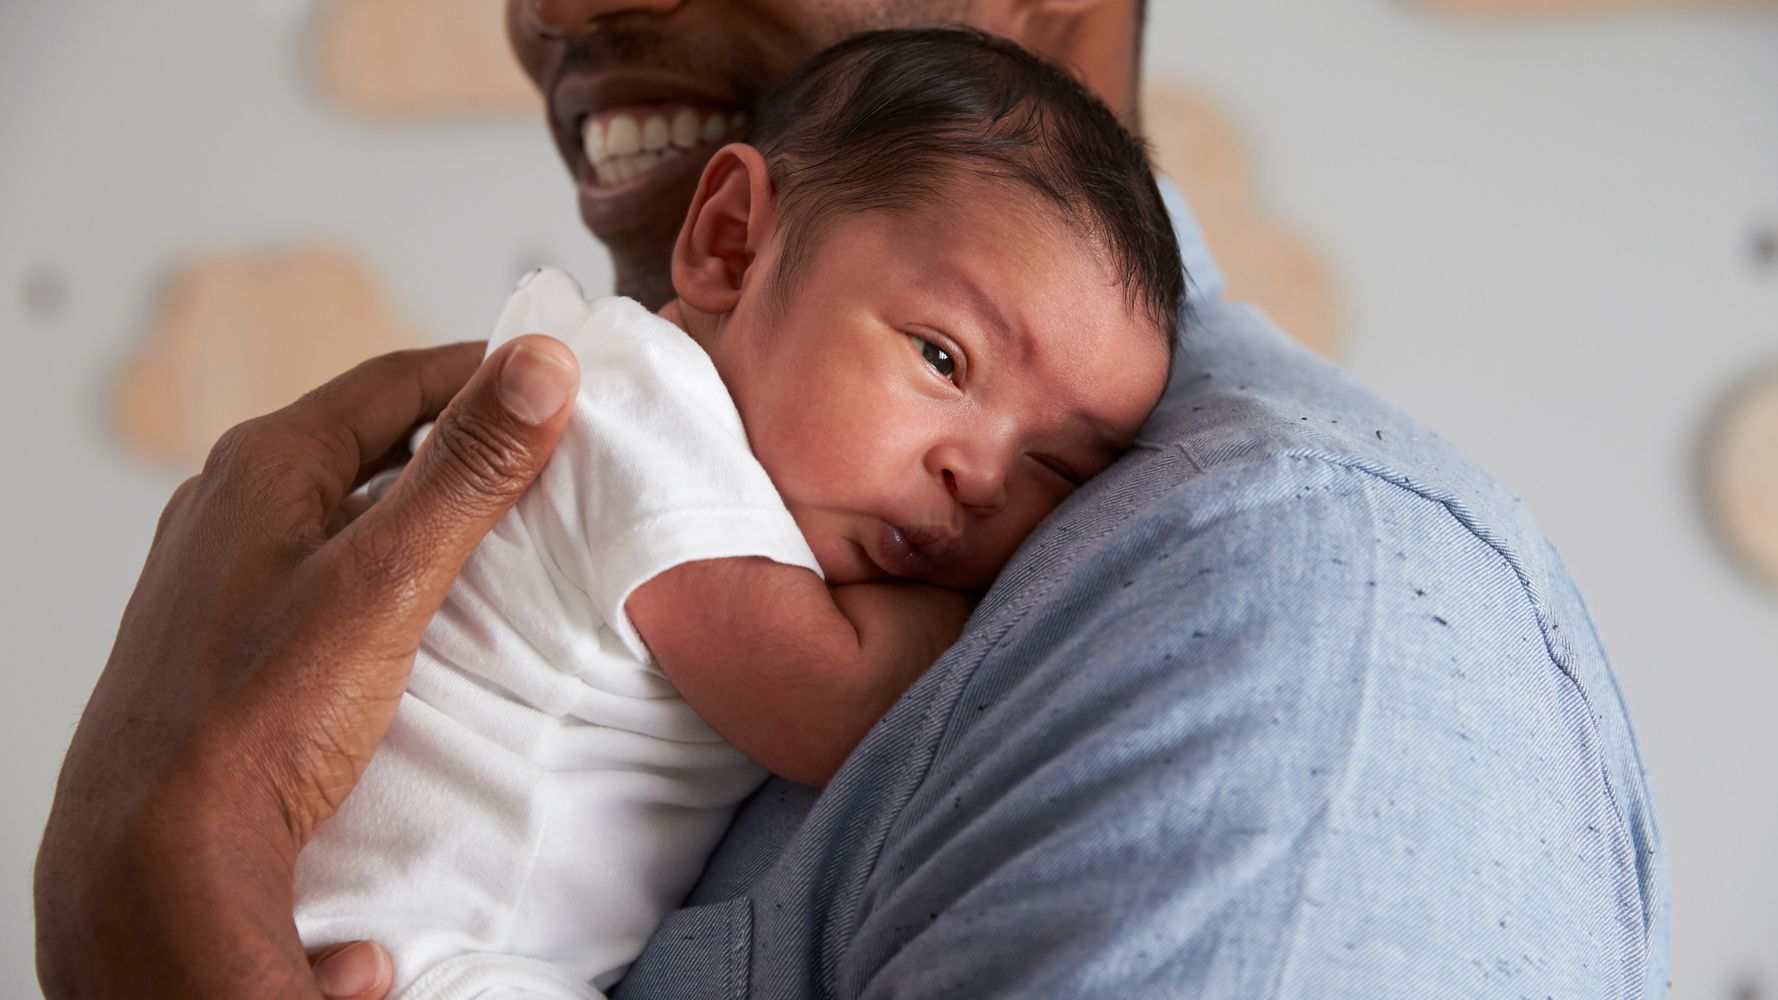 New Parental Leave Changes Give Moms, Dads More Options HuffPost